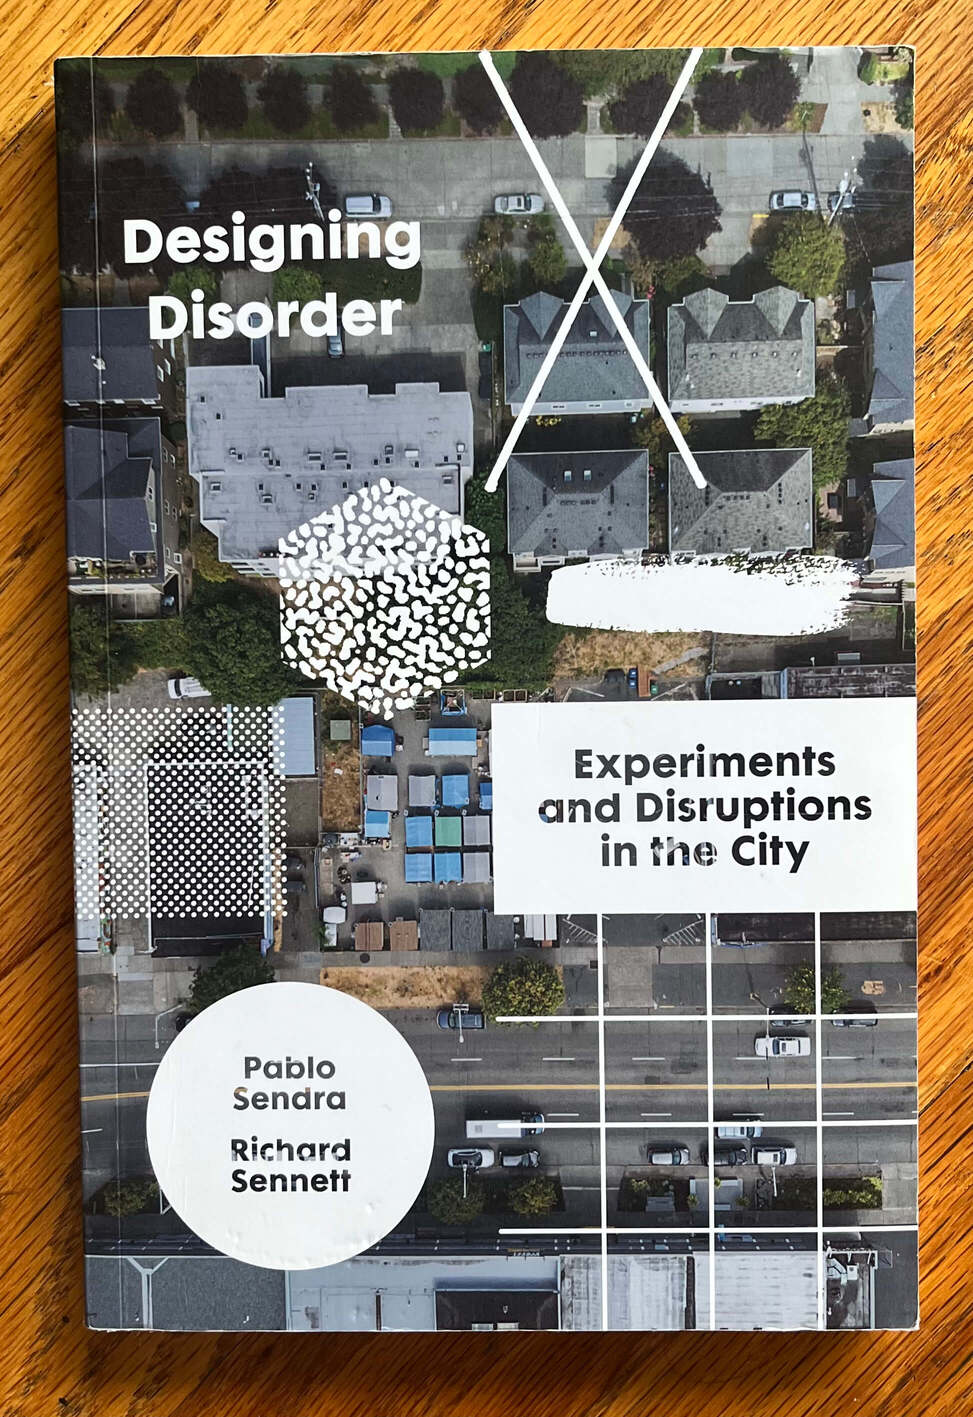 “Designing Disorder: Experiments and Disrubtions in the City” by Pabloe Sendra and Richard Sennett